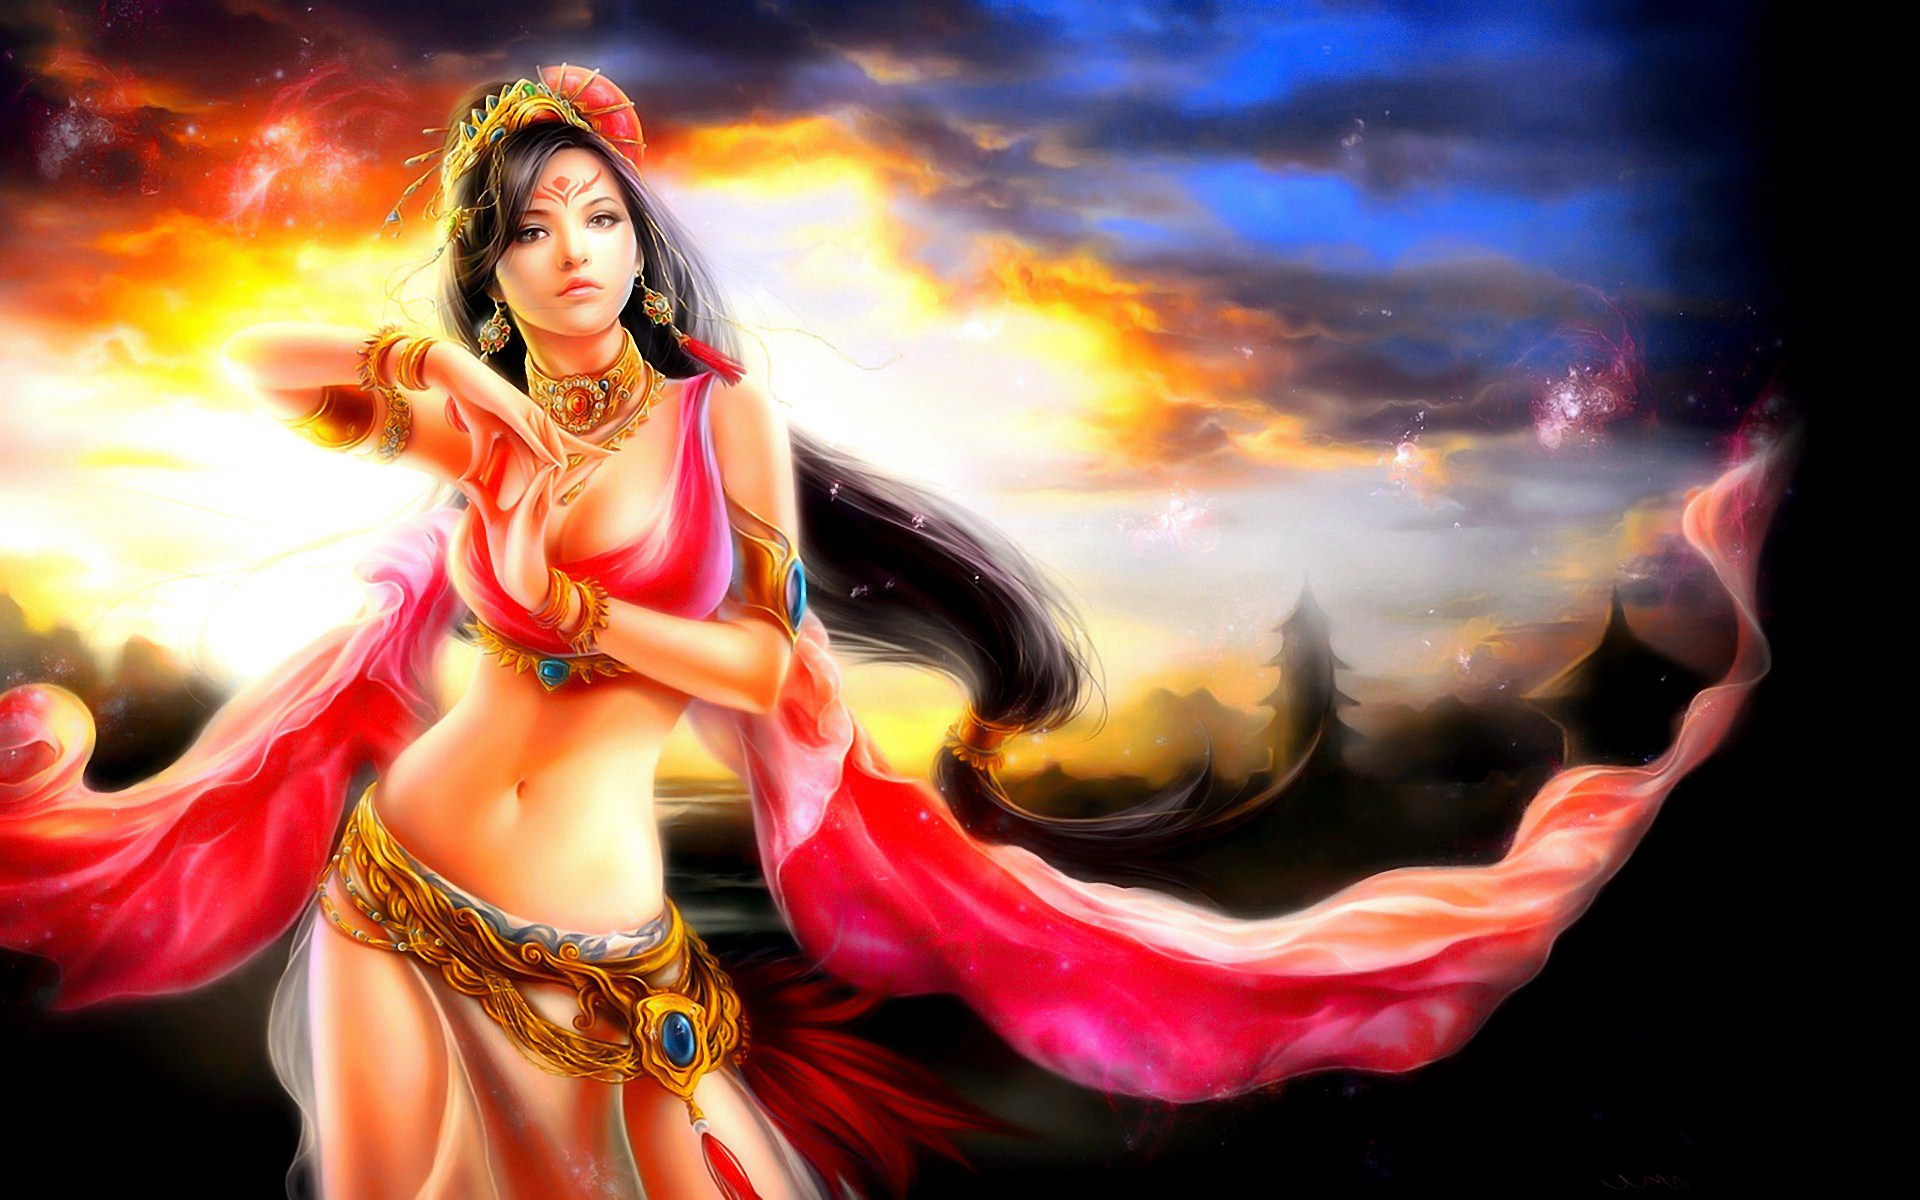 Belly Dance Images Wallpapers13com